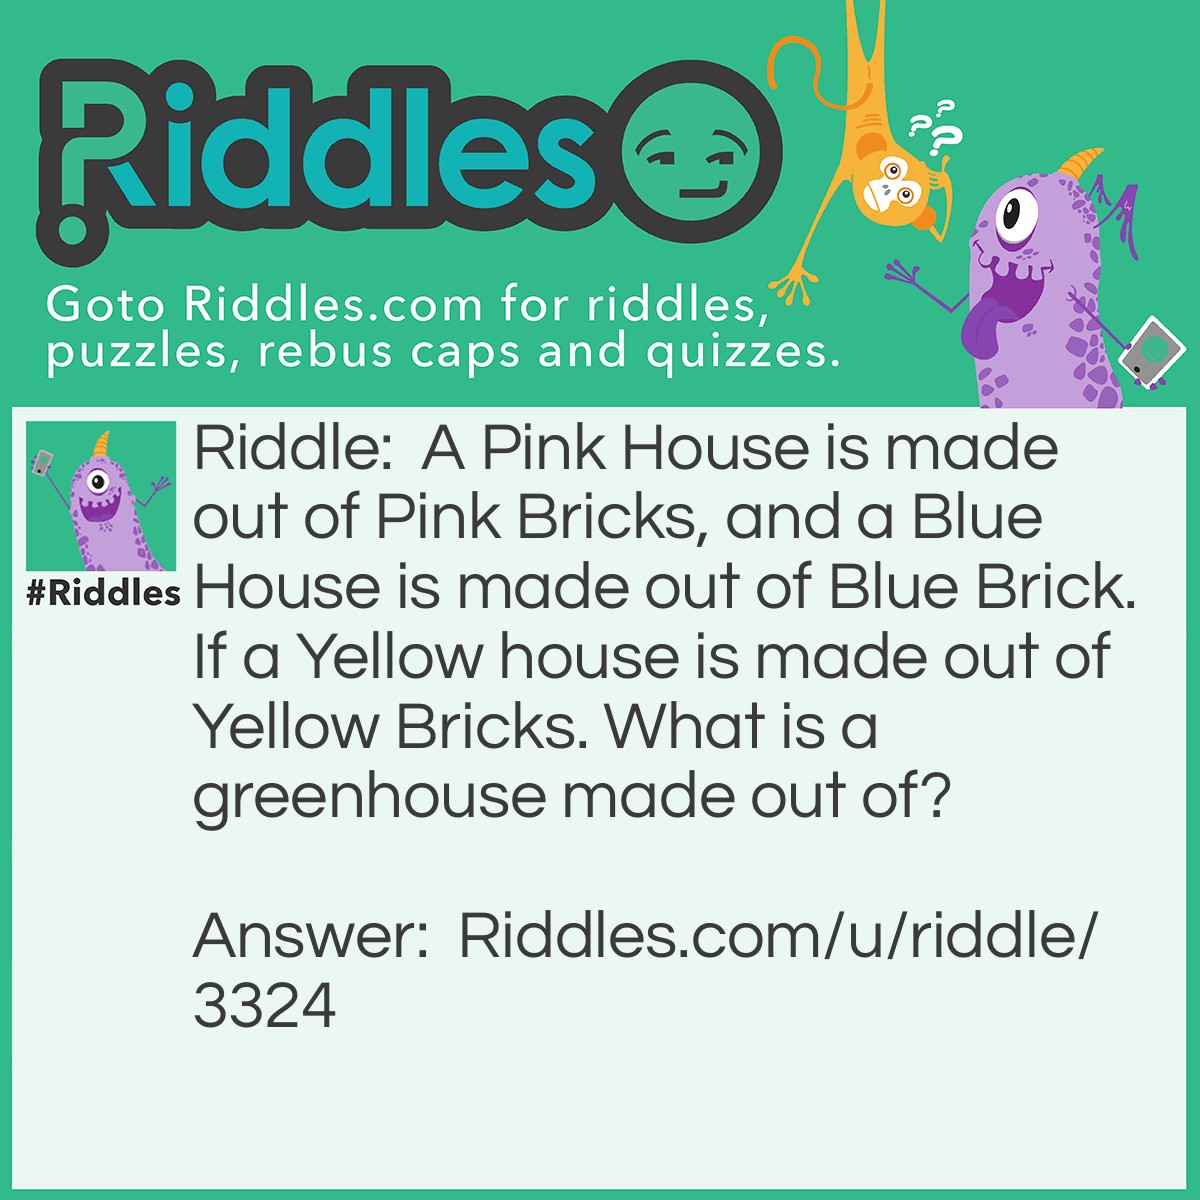 Riddle: A Pink House is made out of Pink Bricks, and a Blue House is made out of Blue Brick. If a Yellow house is made out of Yellow Bricks. What is a greenhouse made out of? Answer: Glass.